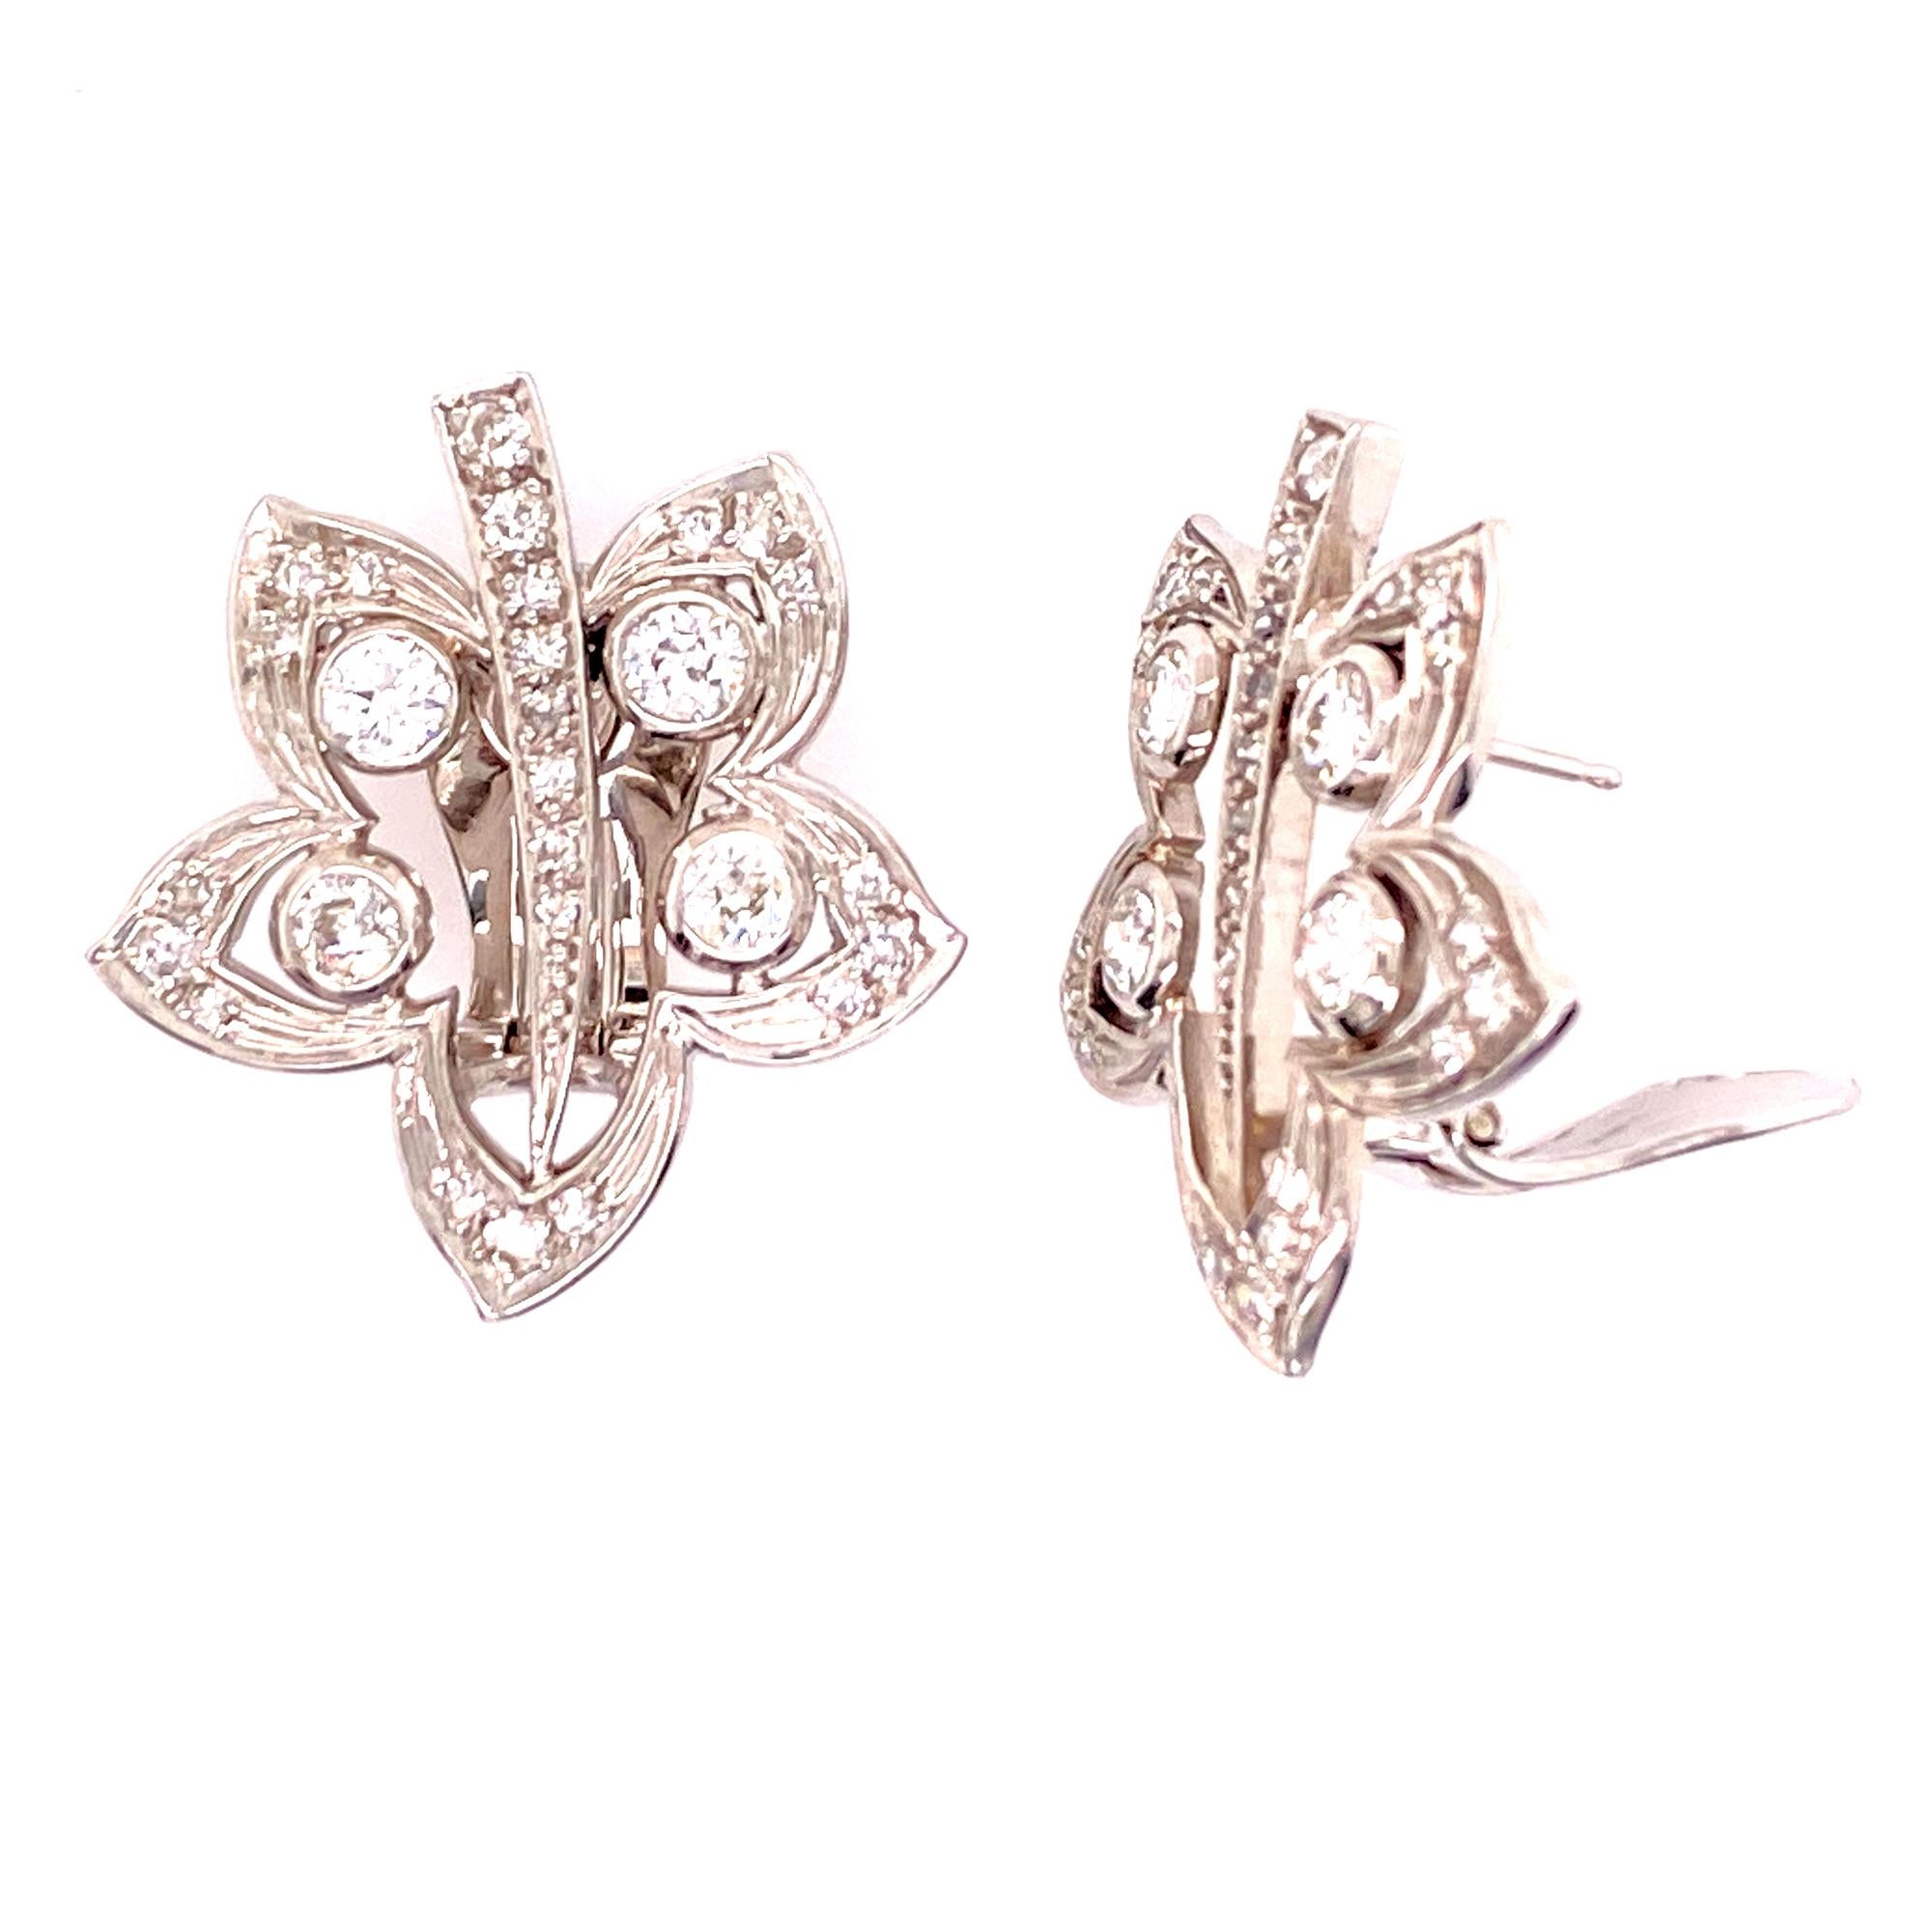 Elegant diamond floral earrings fashioned in 18 karat white gold. The earrings feature 54 round brilliant cut diamonds weighing 2.50 carat total weight. The diamonds are graded F-G color, VS clarity, and measure 1.0 inch in width and 1.10 inches in